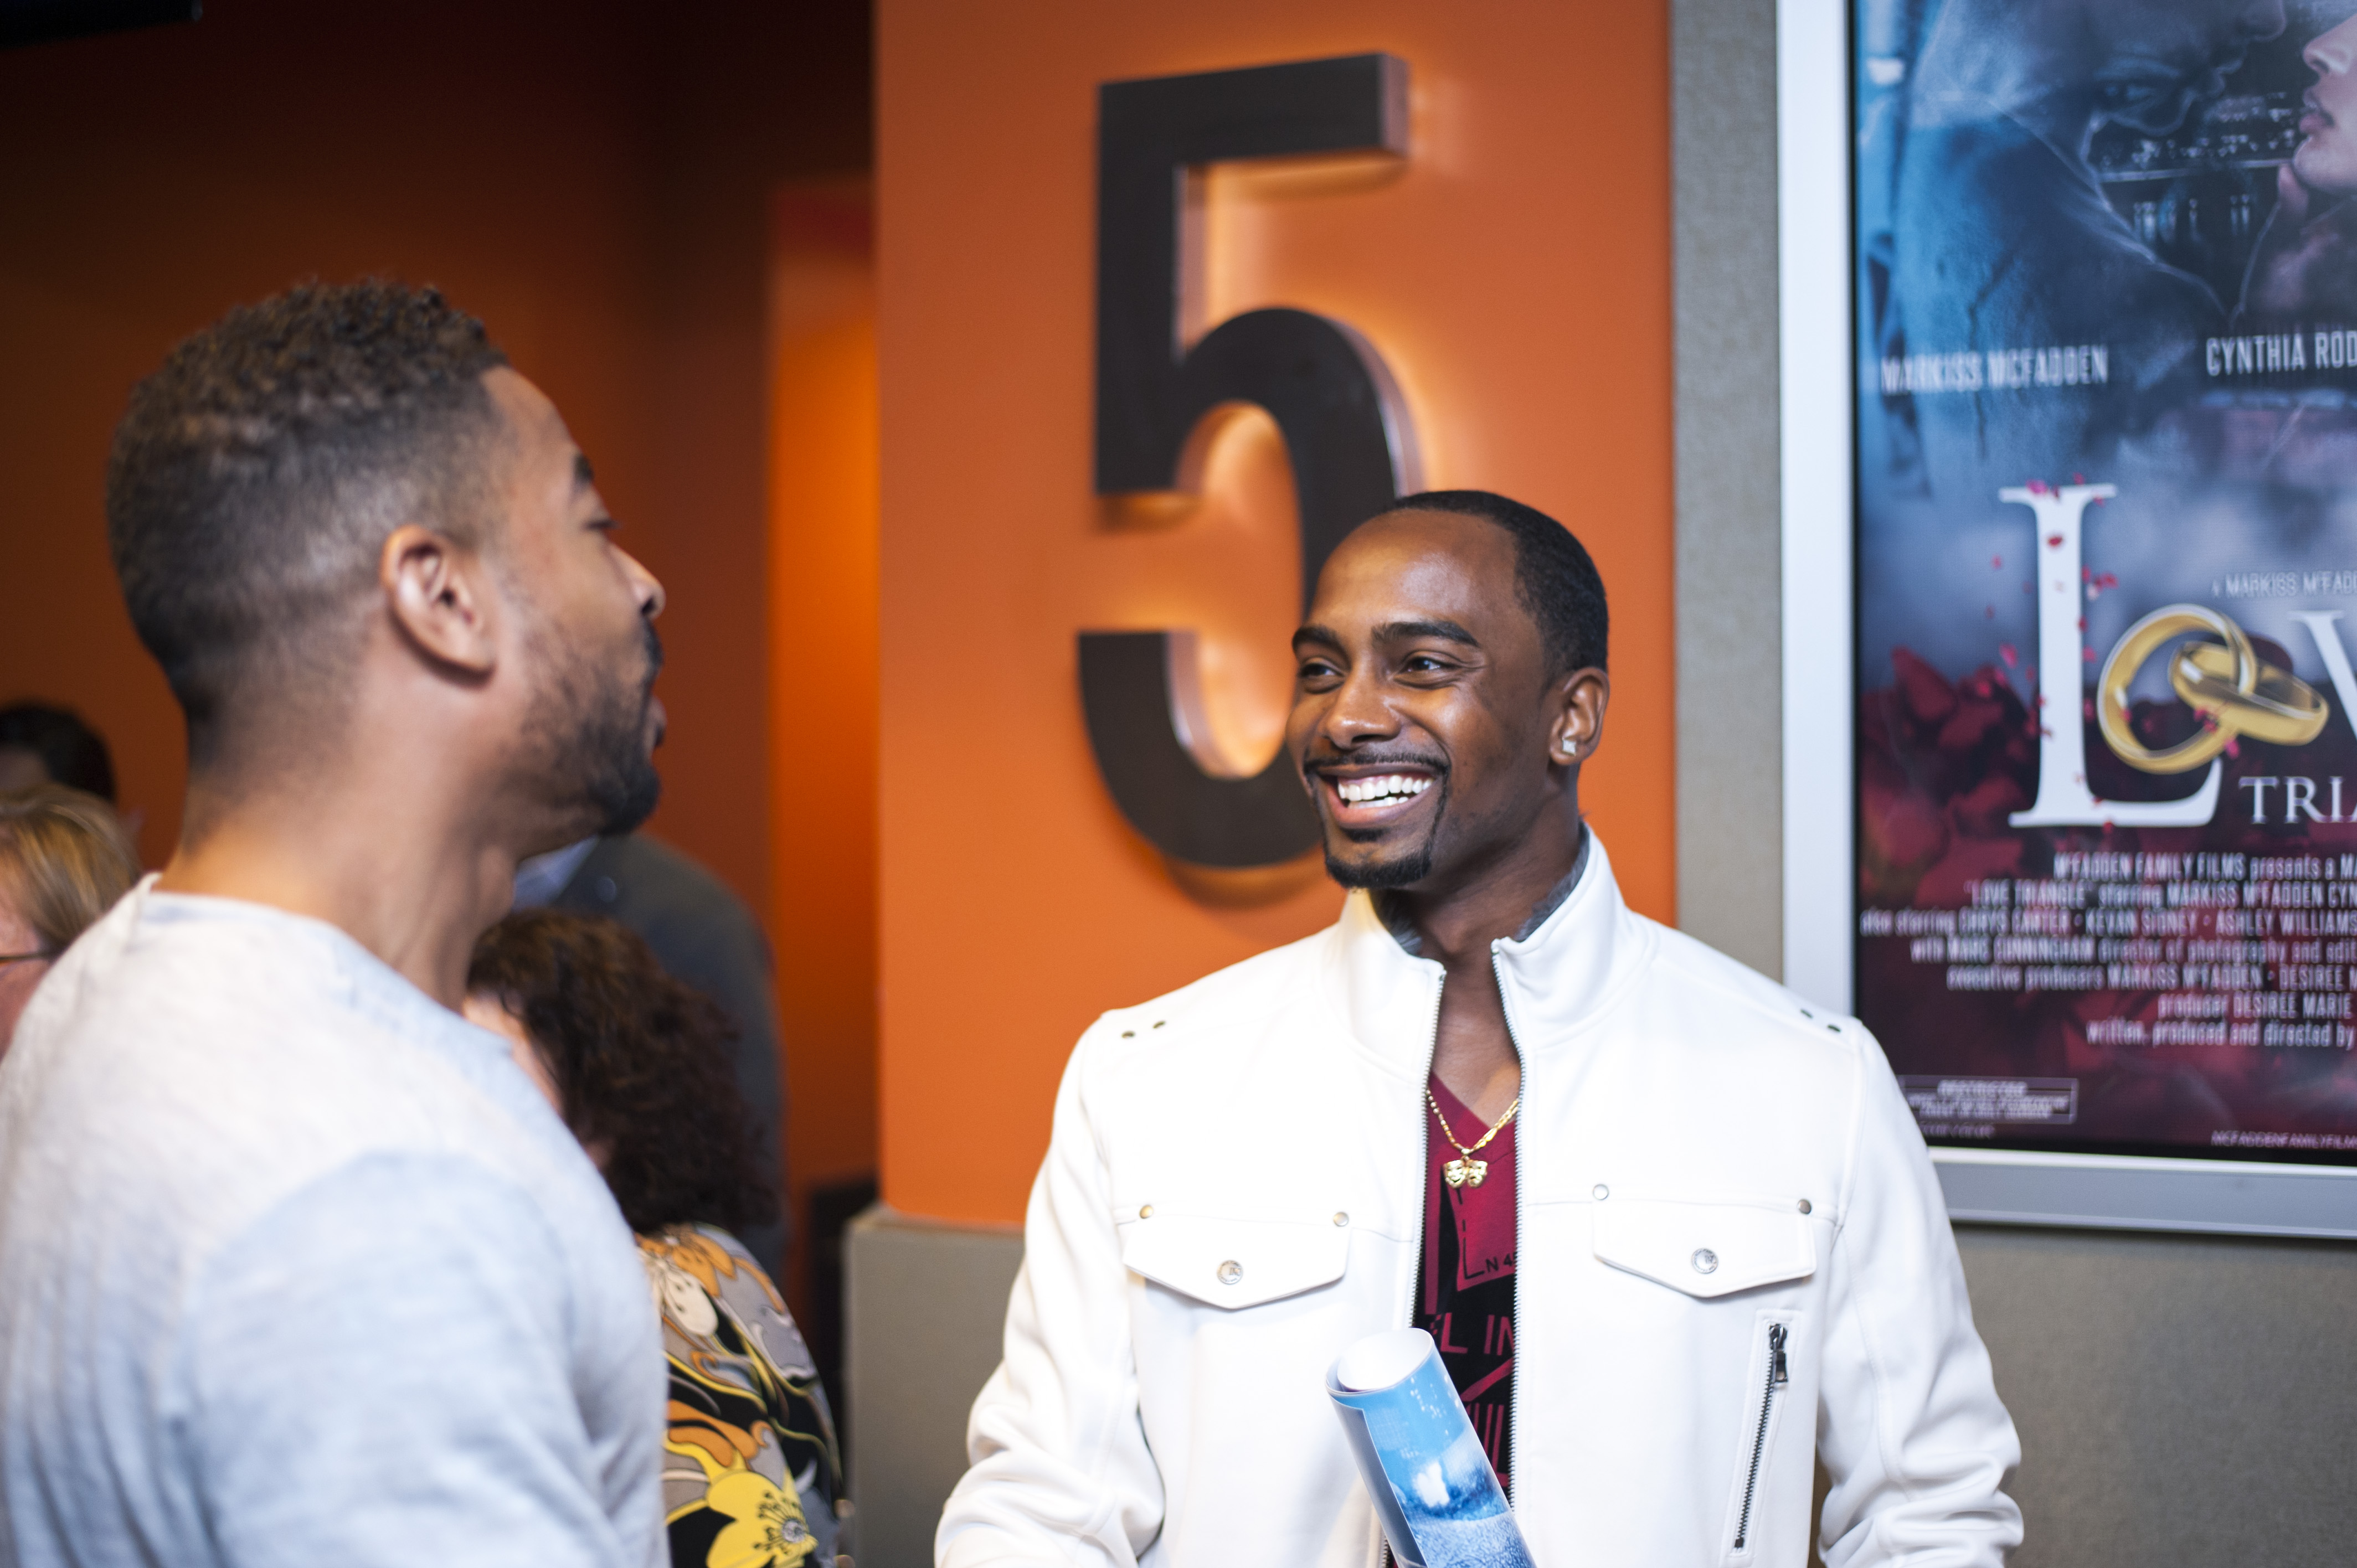 Love Triangle Movie Screening with Markiss McFadden and Giovanni Watson